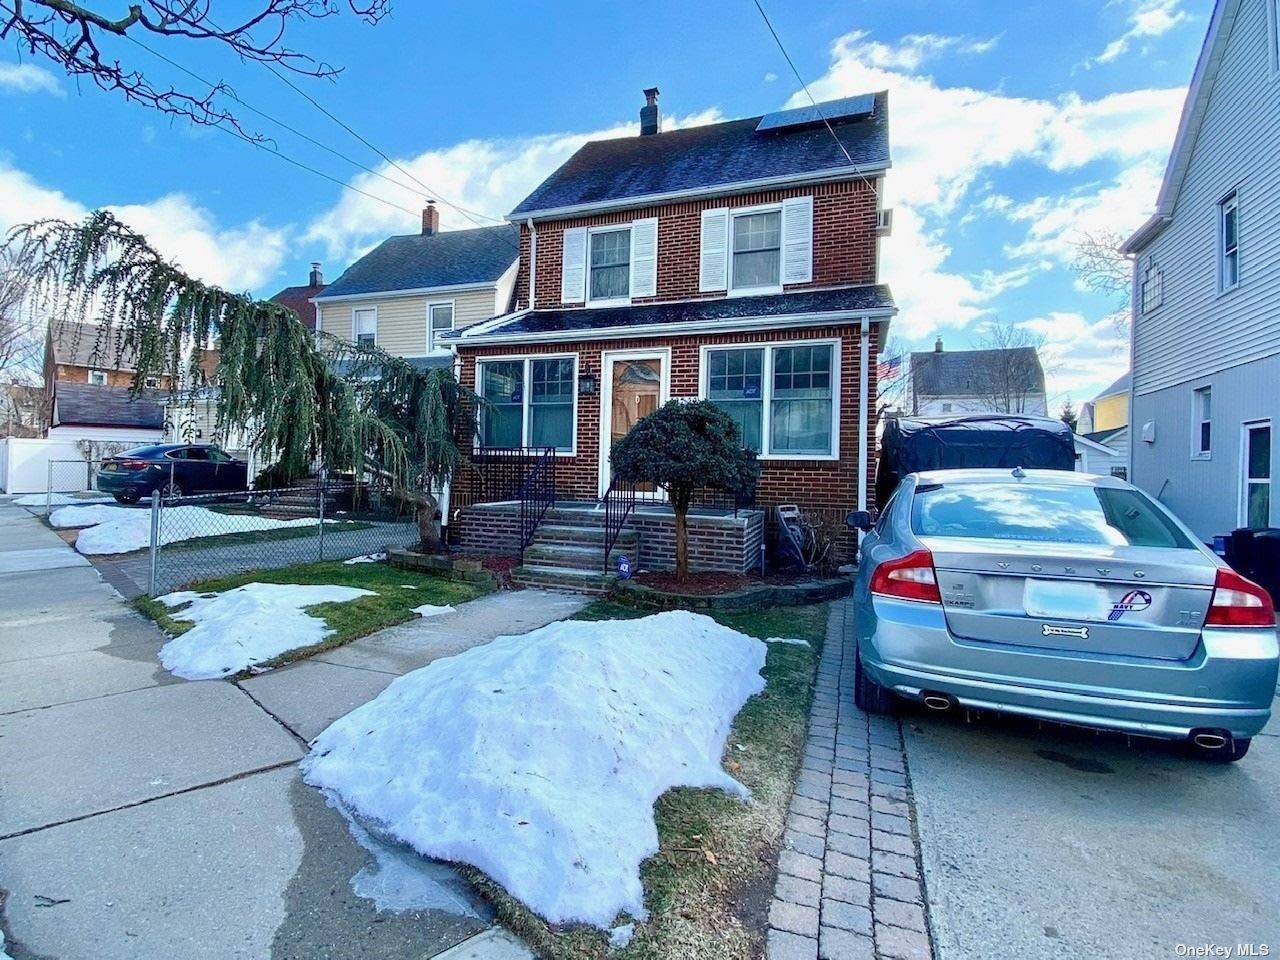 FIRST TIME OFFERED FULLY DETACHED SOLID BRICK 1 FAMILY ON AN OVERSIZED LOT IN ONE OF BELLROSE'S MOST DESIRABLE LOCATIONS.